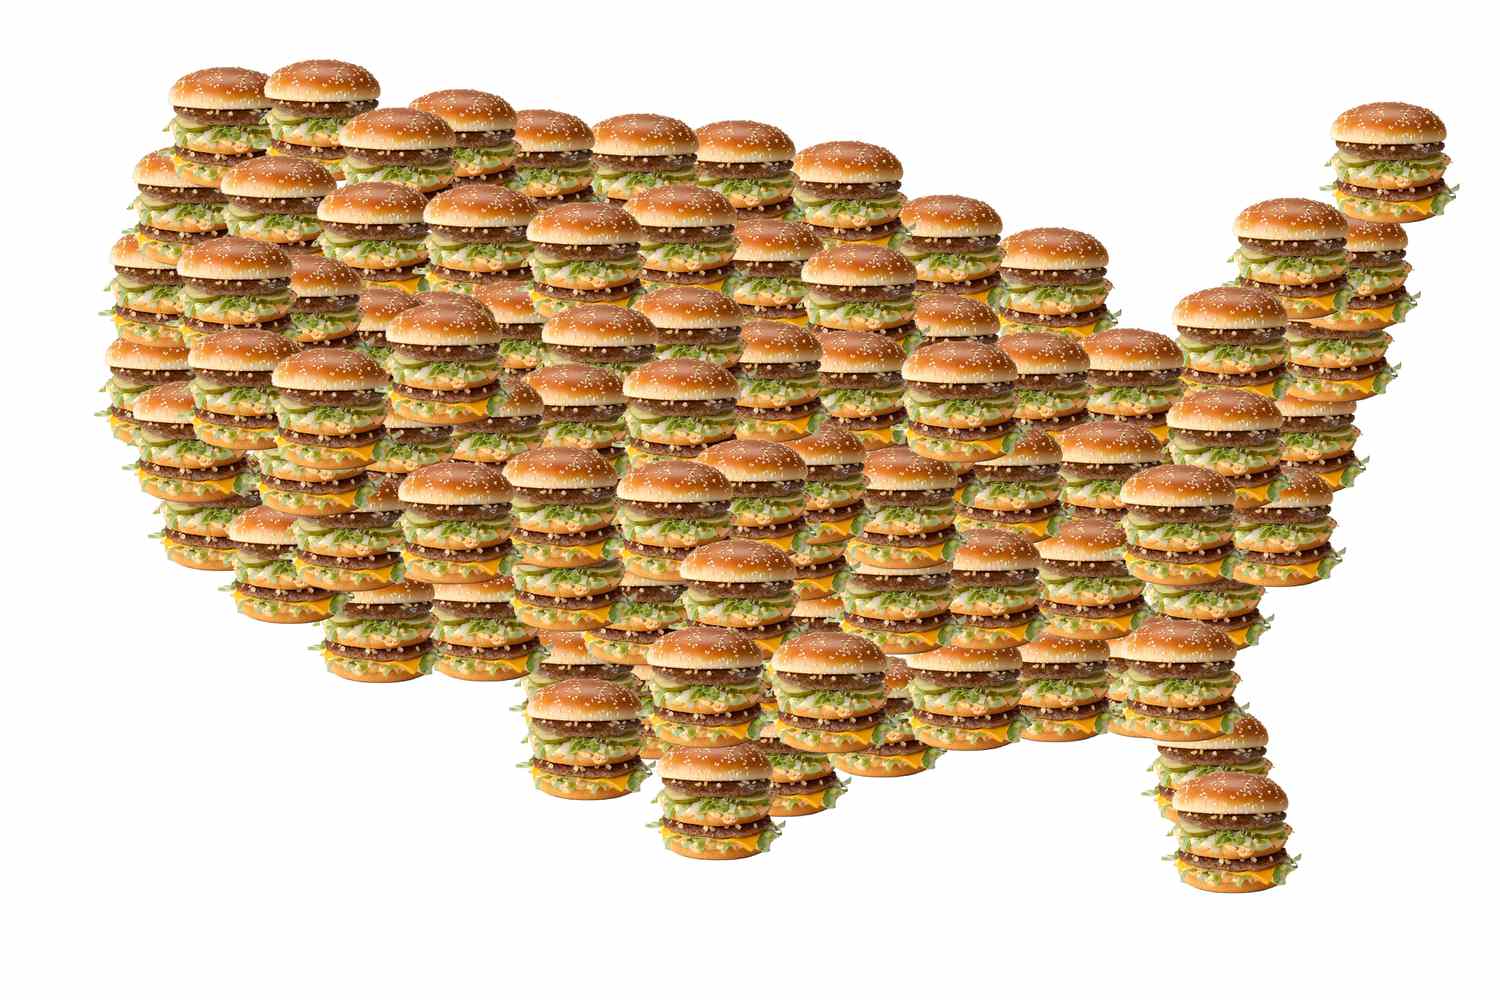 The McCheapest Map Will Help You Locate the Most Inexpensive Big Mac in America [Video]